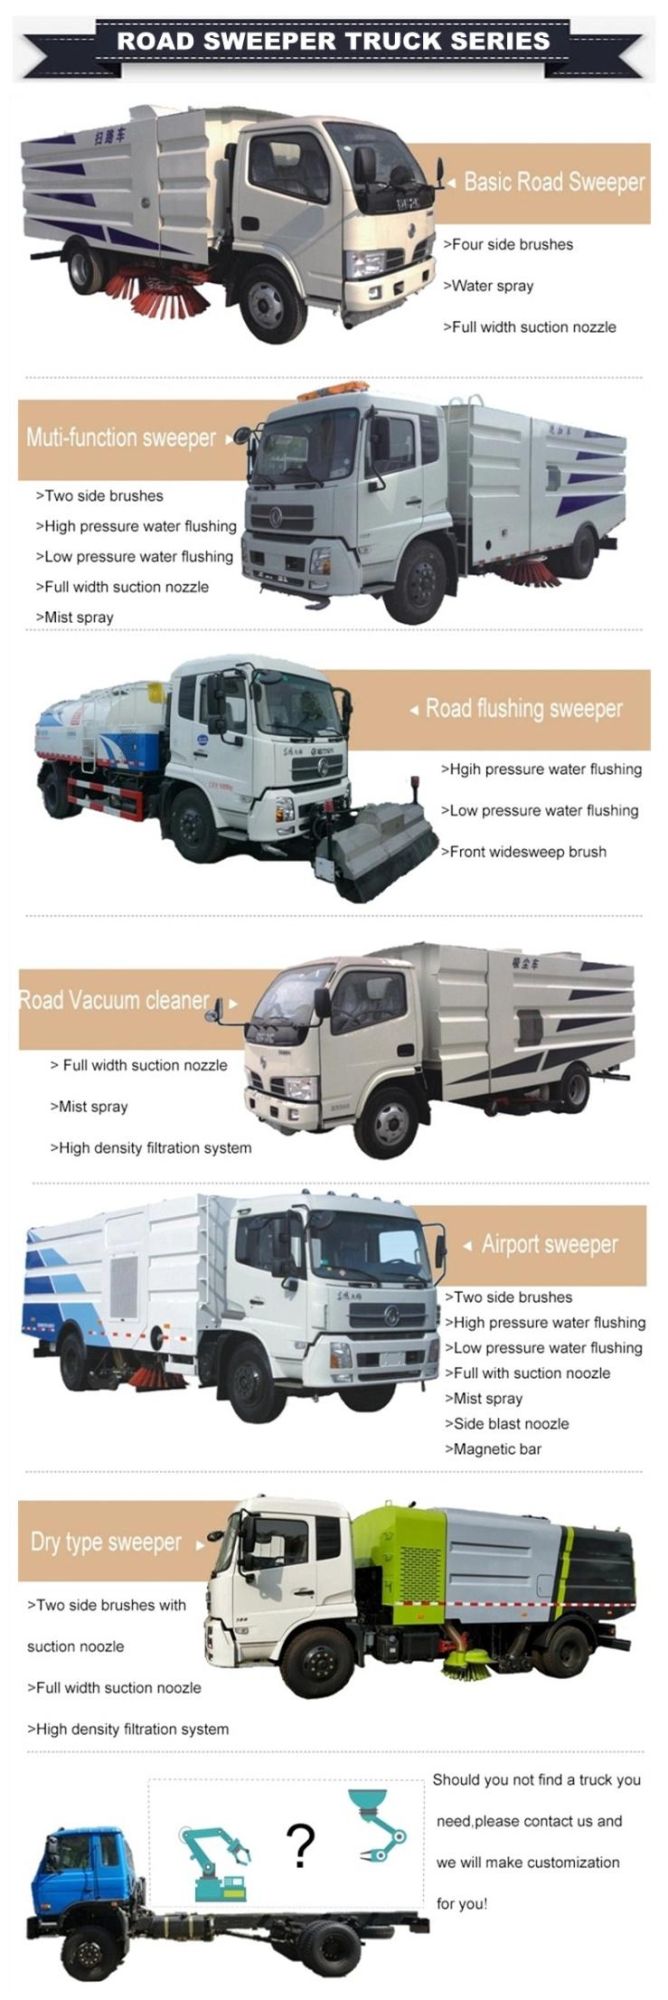 Cheap Price Japanese Isuzu Road Sweeper Truck for Street Cleaning